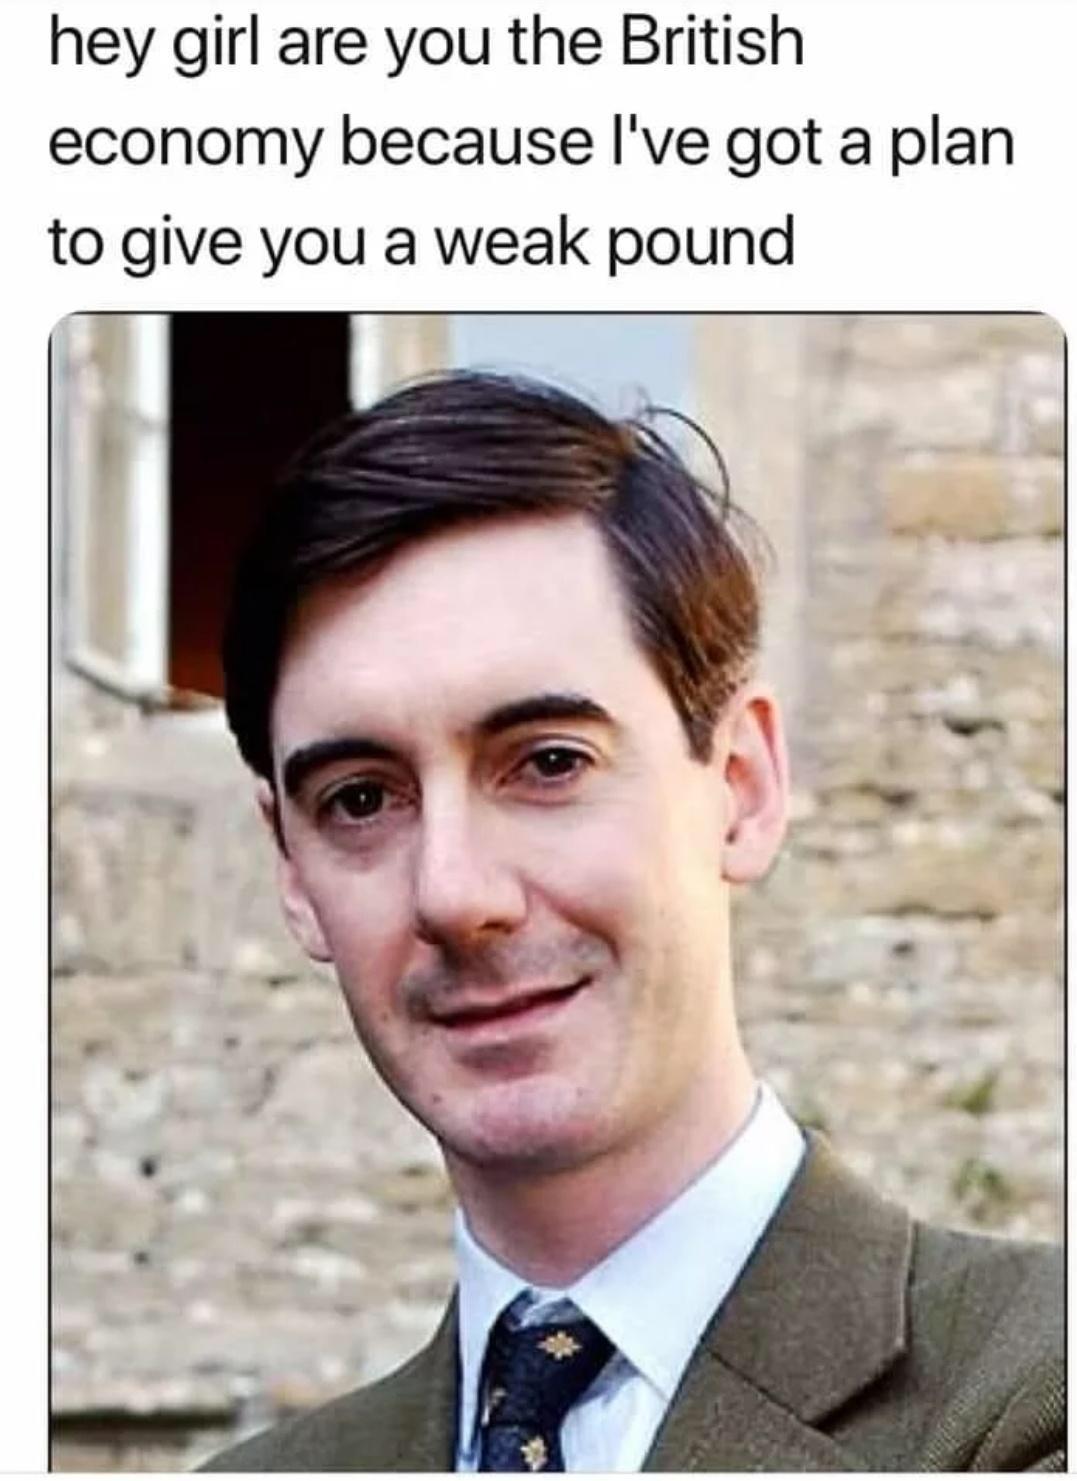 Fresh Pics And Memes - jacob rees mogg - hey girl are you the British economy because I've got a plan to give you a weak pound